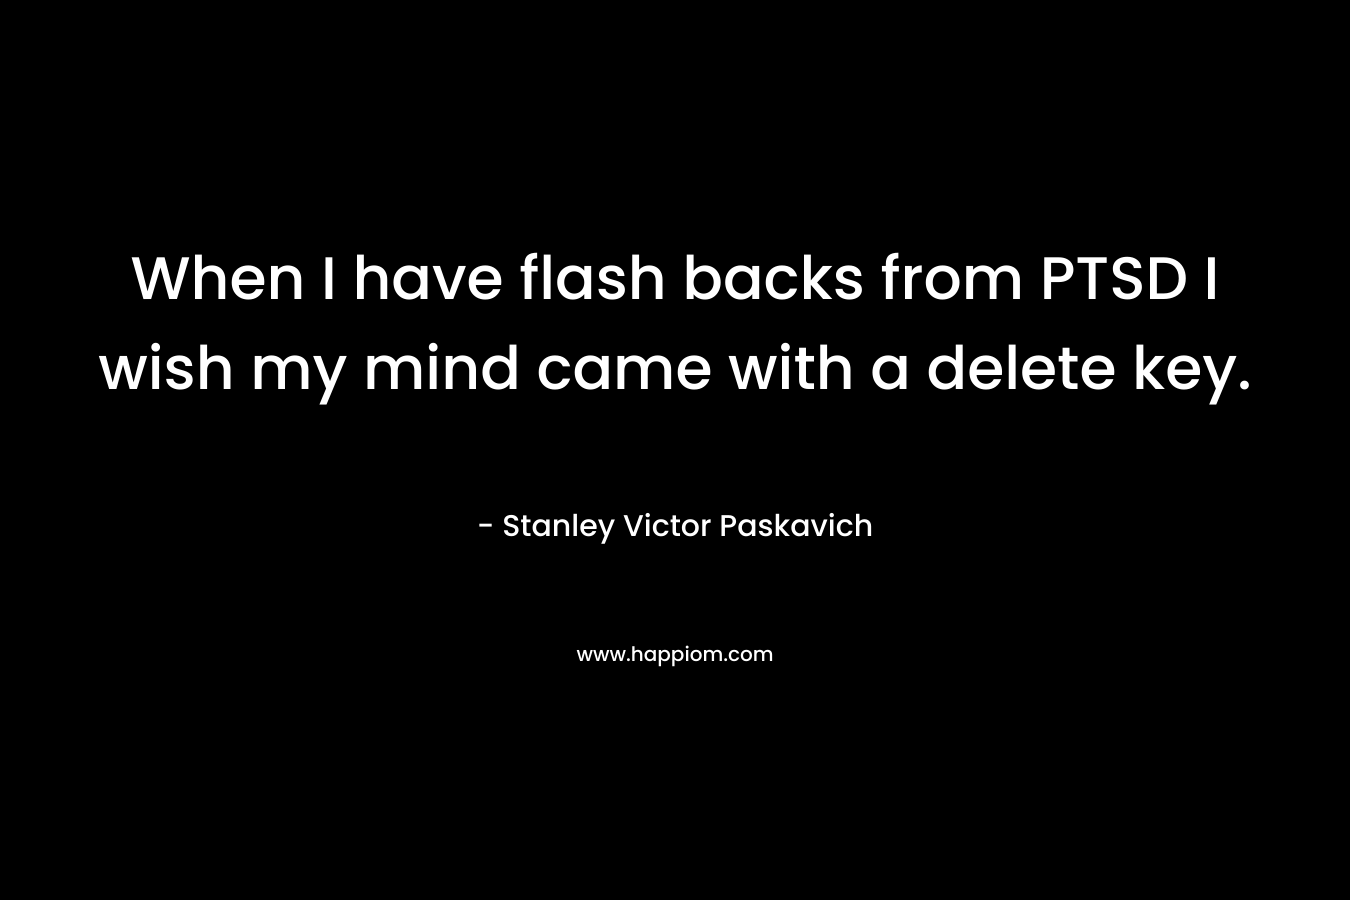 When I have flash backs from PTSD I wish my mind came with a delete key. – Stanley Victor Paskavich